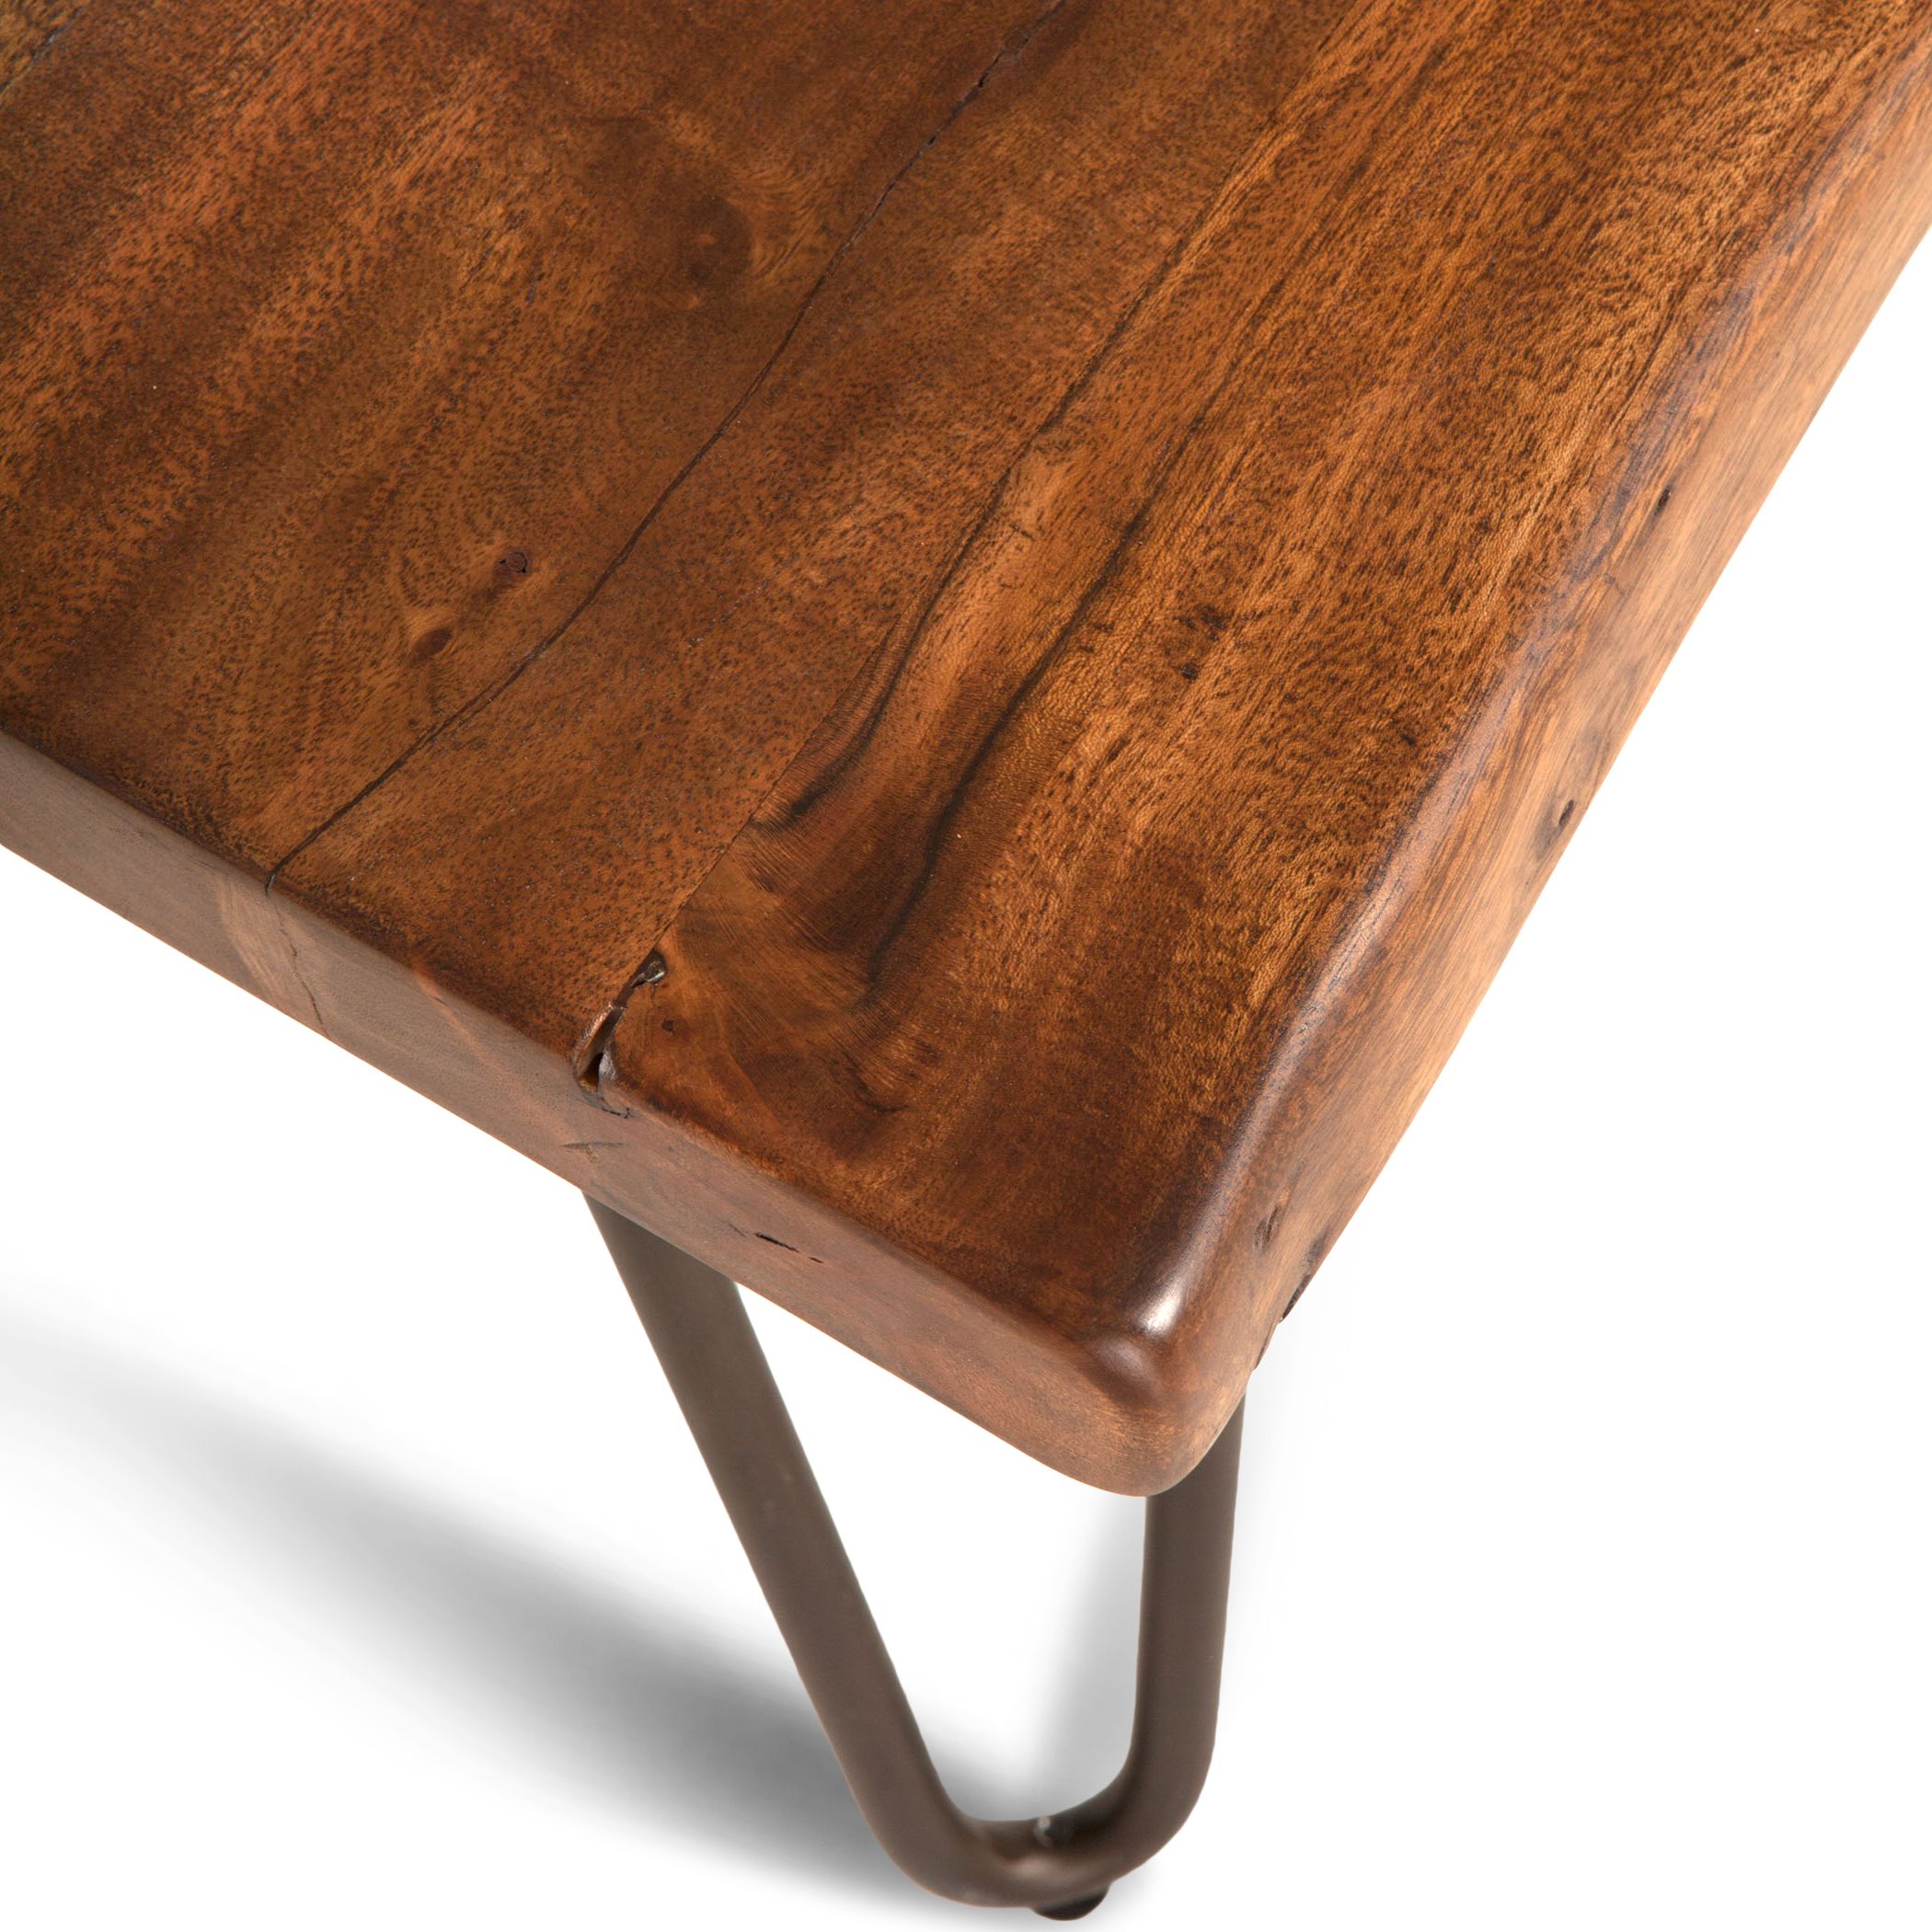 Vail Acacia Wood Live Edge Coffee Table In Walnut Finish Within Famous Walnut Coffee Tables (View 17 of 20)